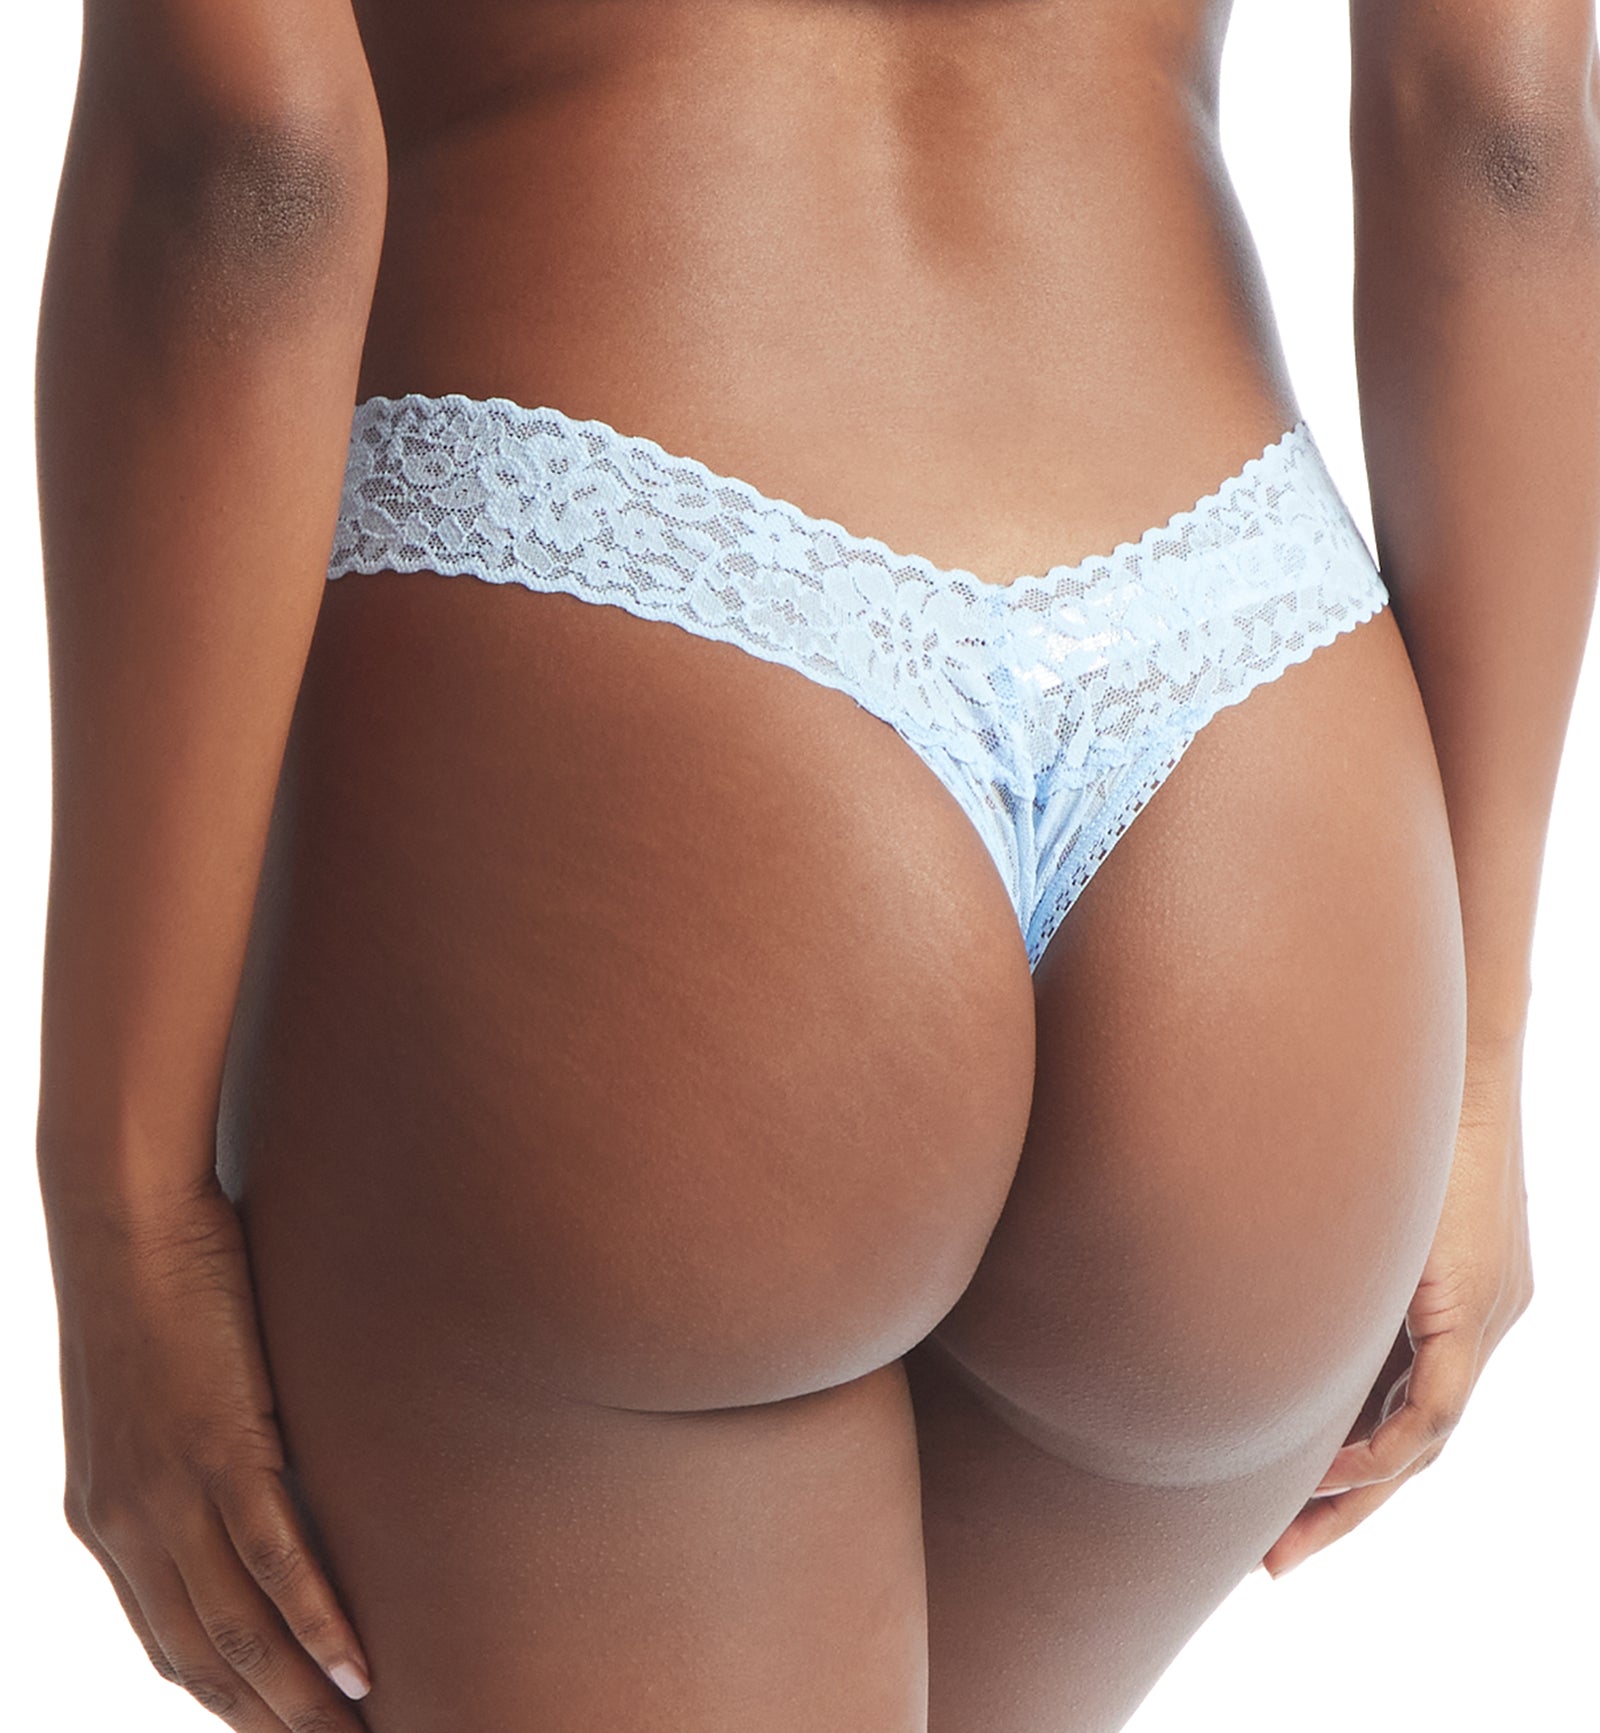 Hanky Panky Daily Lace Low Rise Thong (771001P),Fresh Air - Fresh Air,One Size